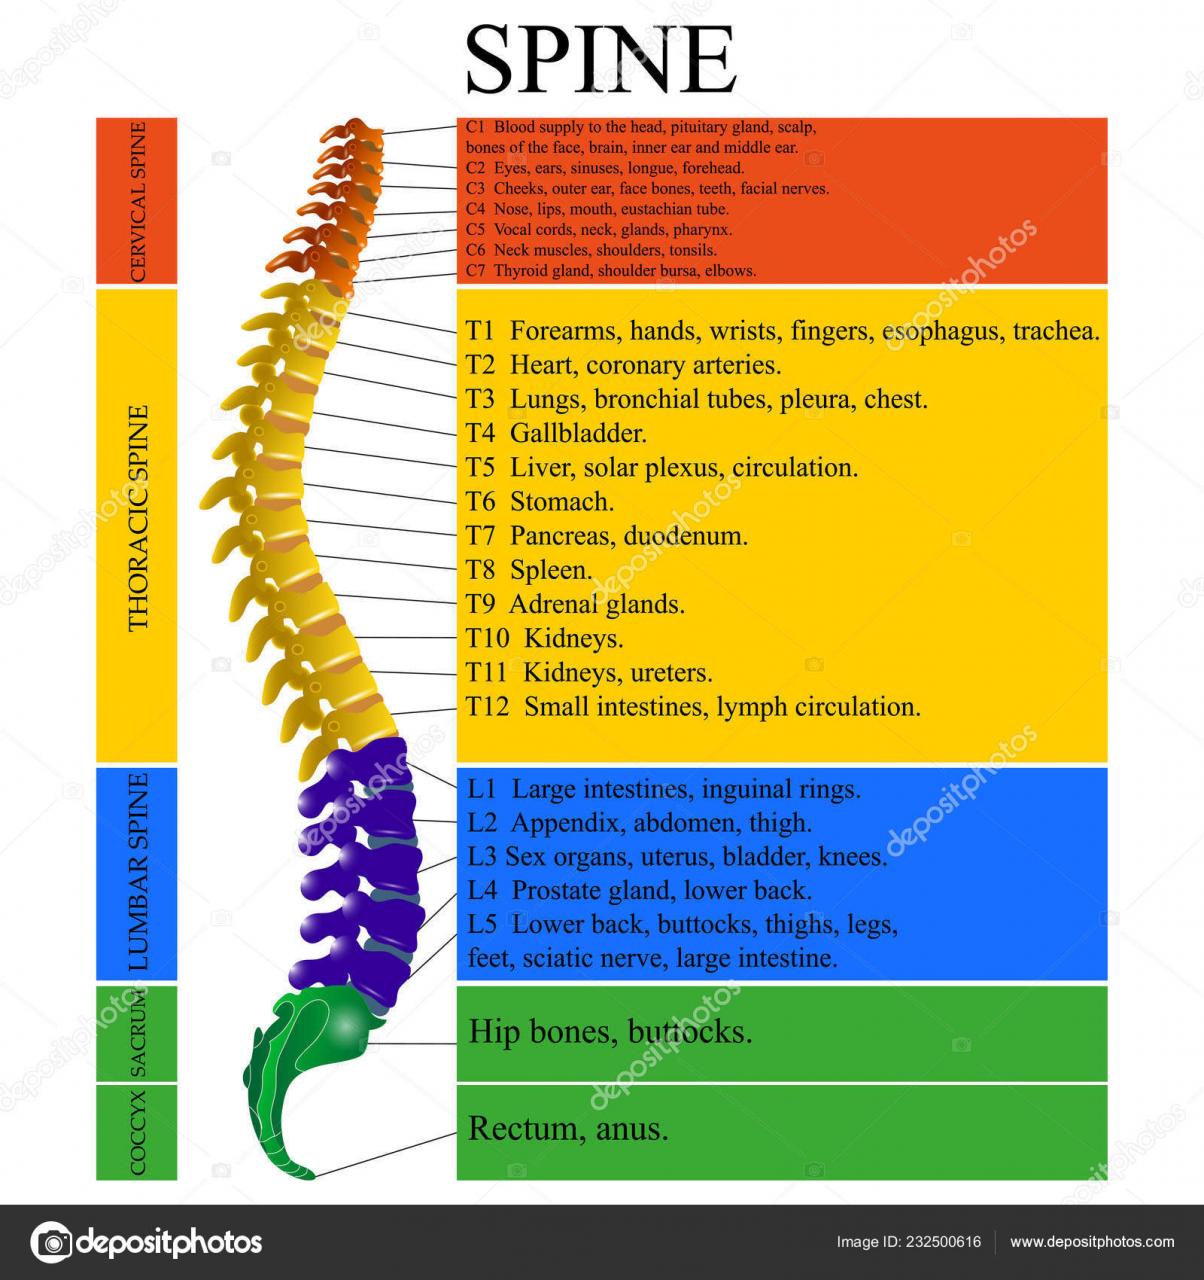 Diagram of the Human Spine with Descriptions